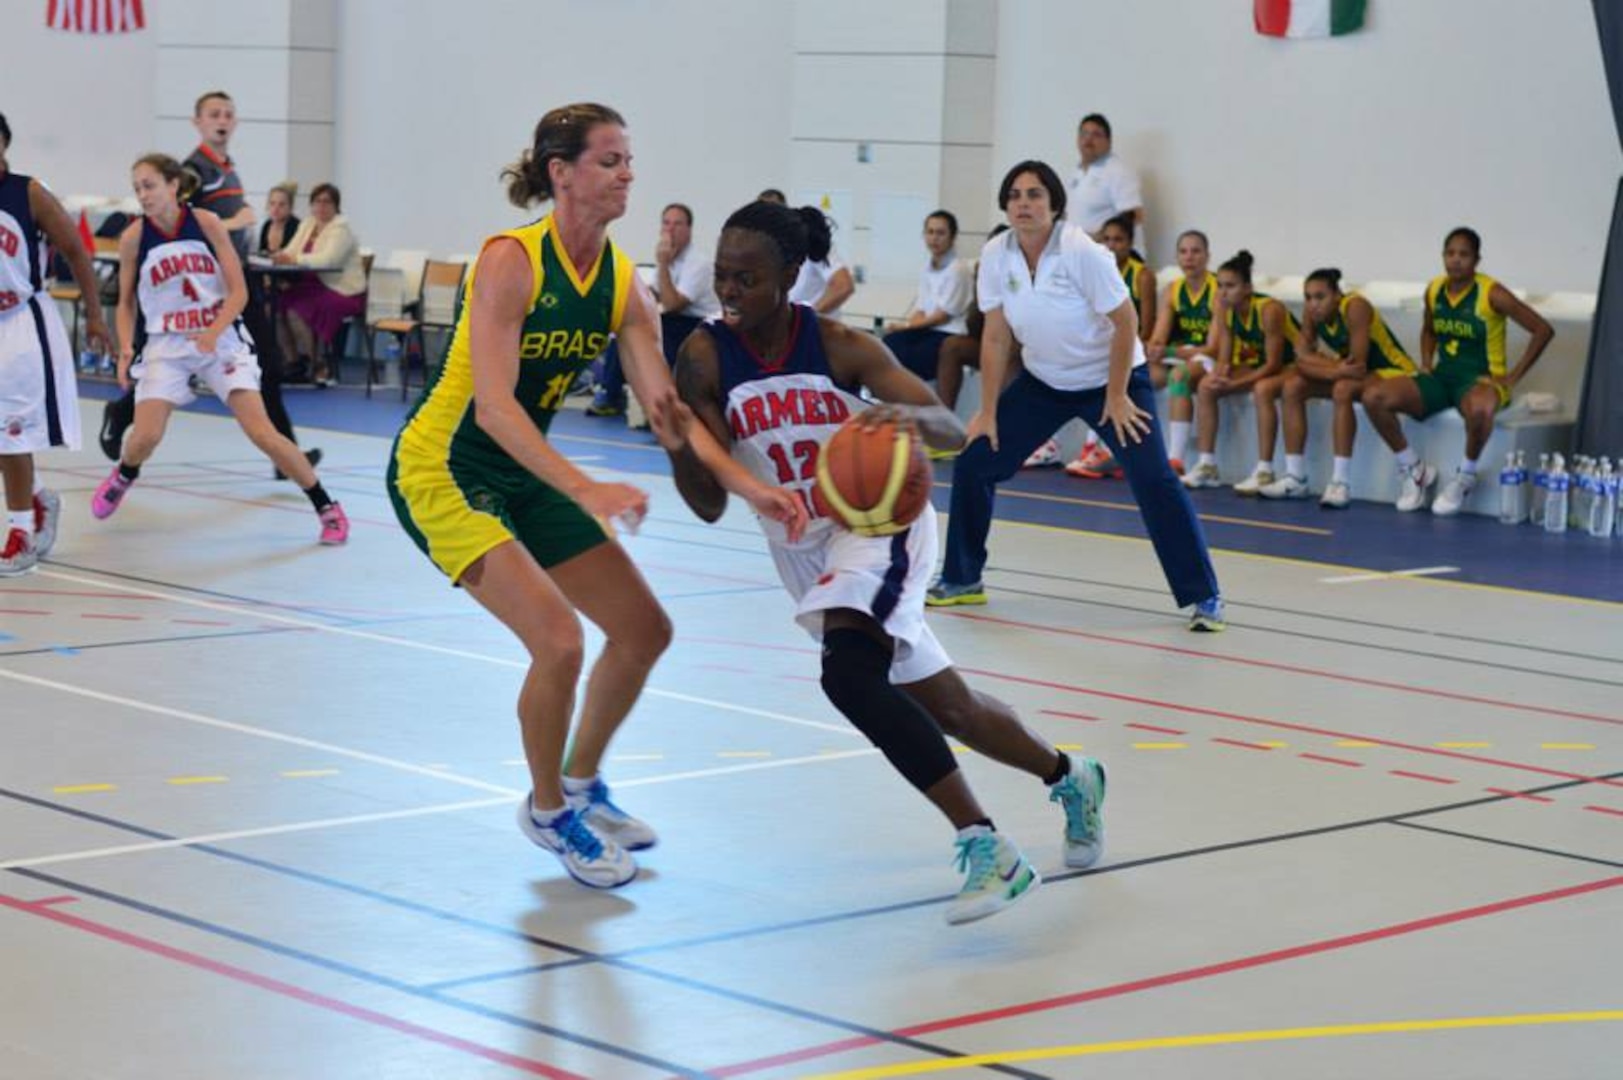 Army SGT Kimberly Smith (Fort Riley, KS) drives past her Brazilian defender.  The U.S. Armed Forces Women’s Basketball team competed in the 2014 Conseil International du Sport Militaire (CISM) Basketball Championship in Meyenheim, France from 15-22 June.